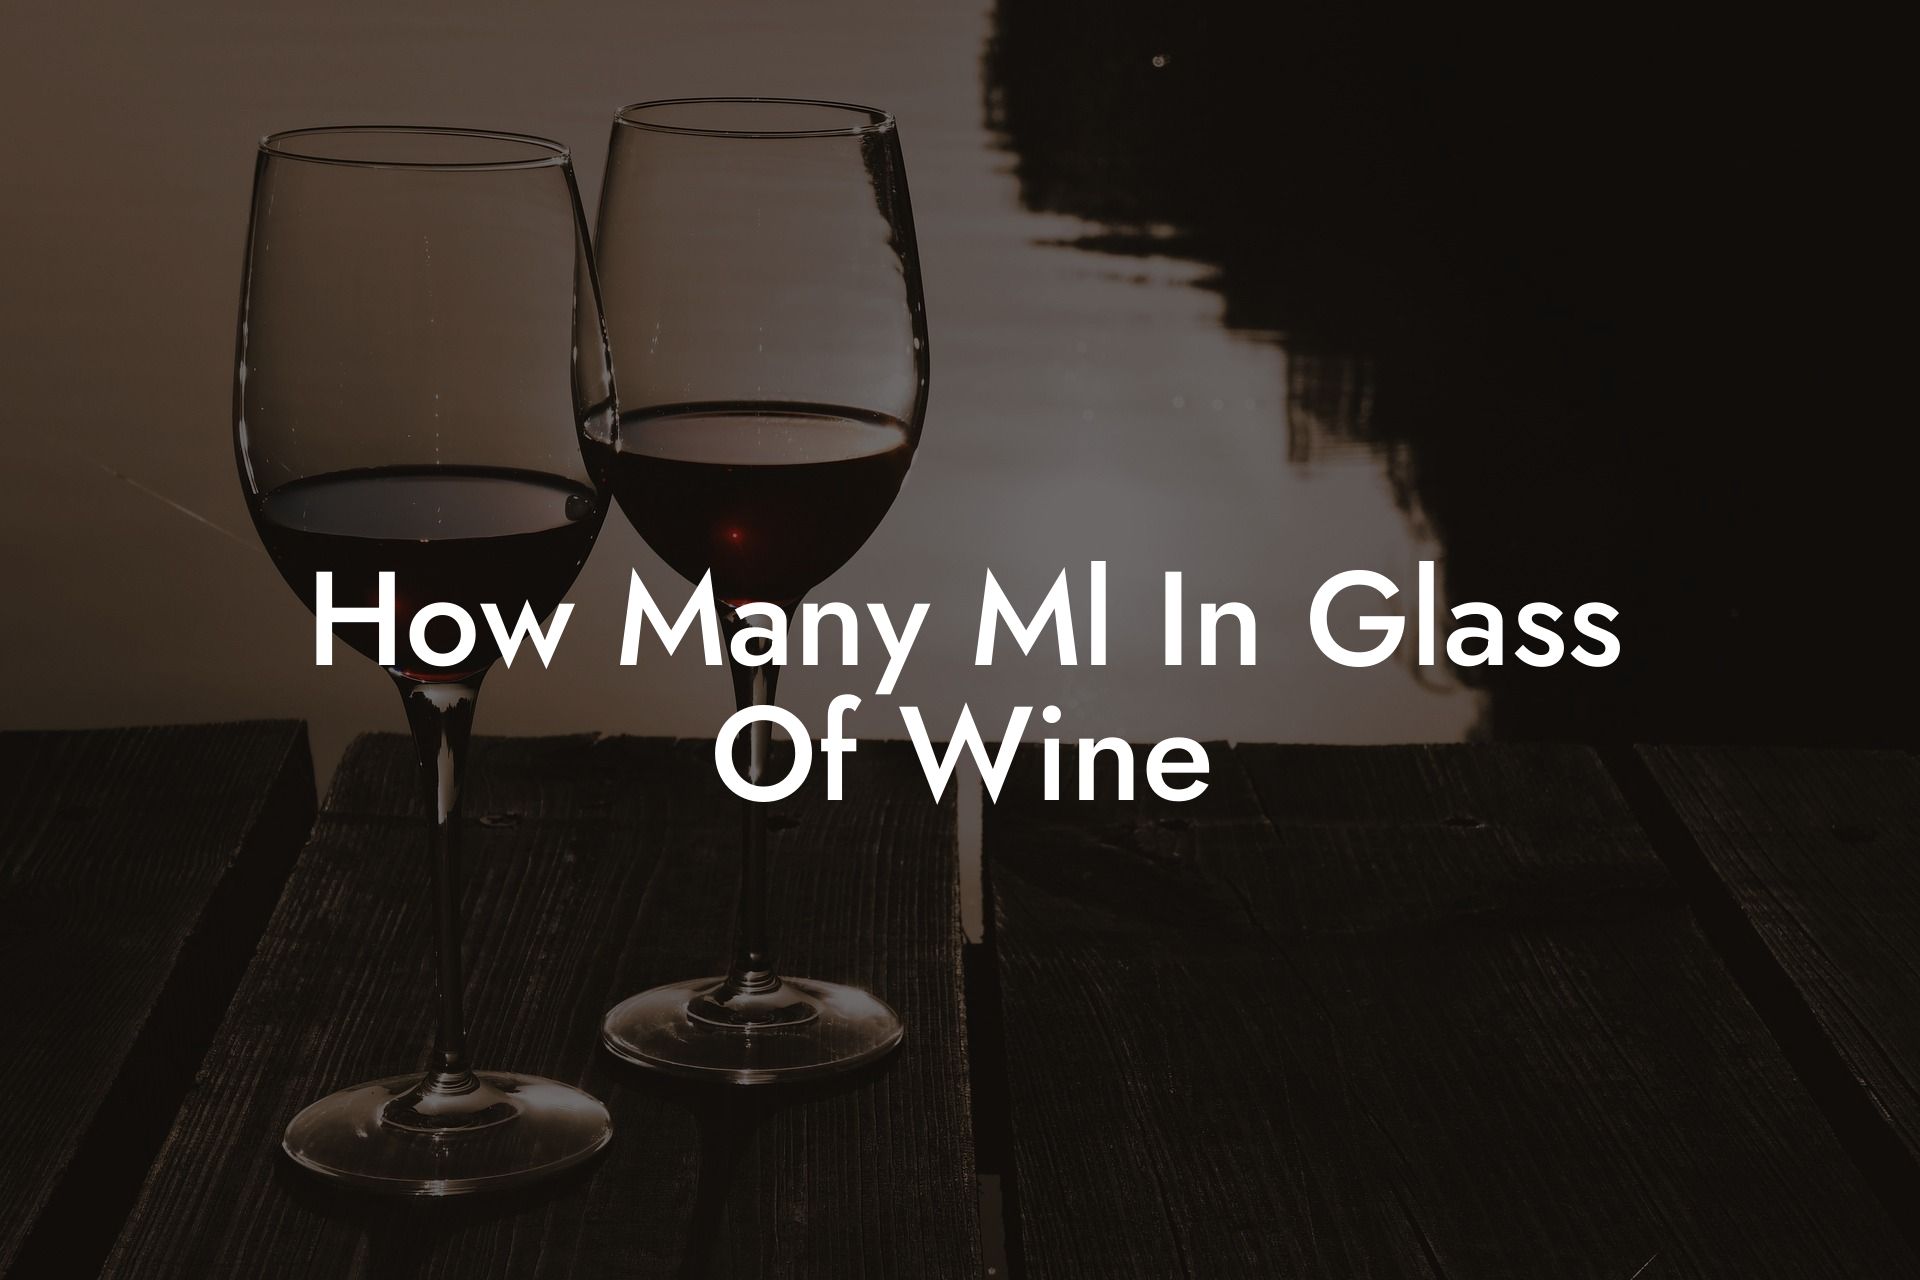 How Many Ml In Glass Of Wine